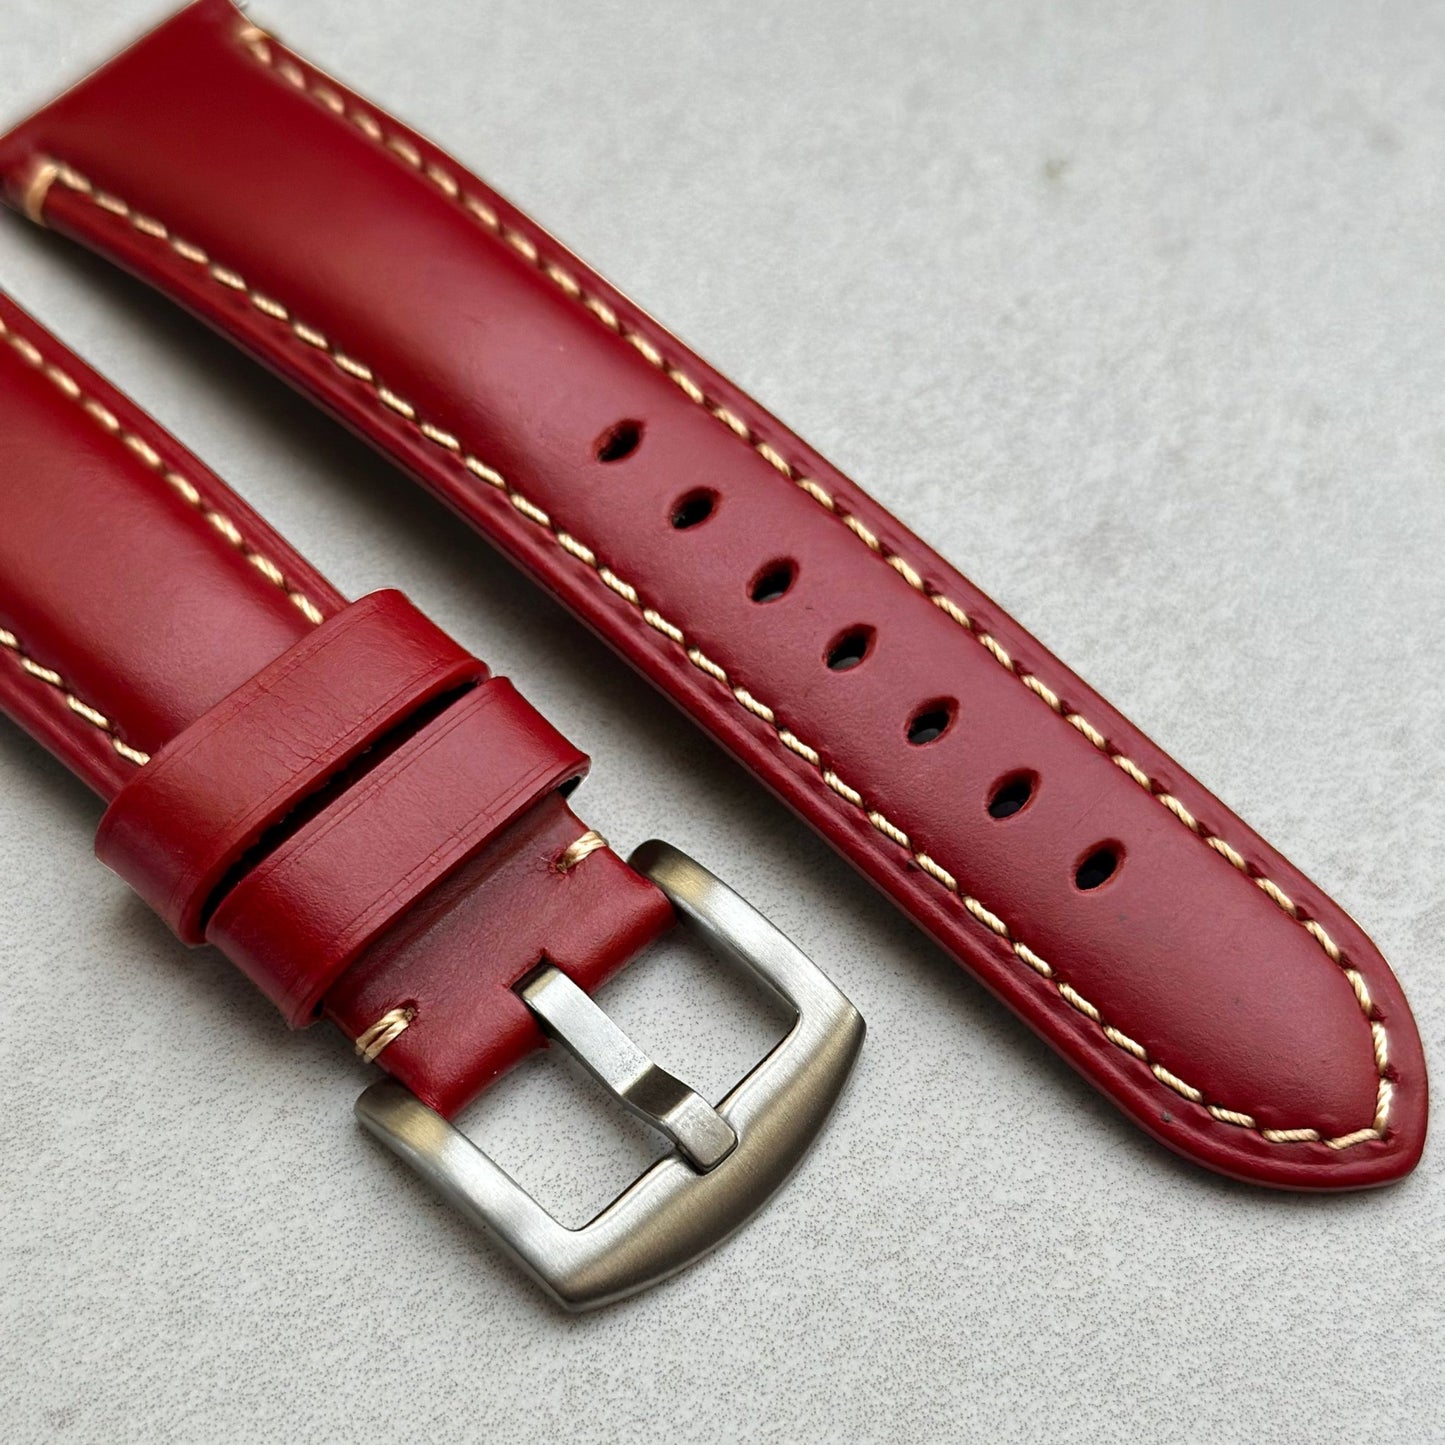 Brushed 316L stainless steel buckle on the Oslo blood red full grain leather watch strap. Contrast ivory stitching. 